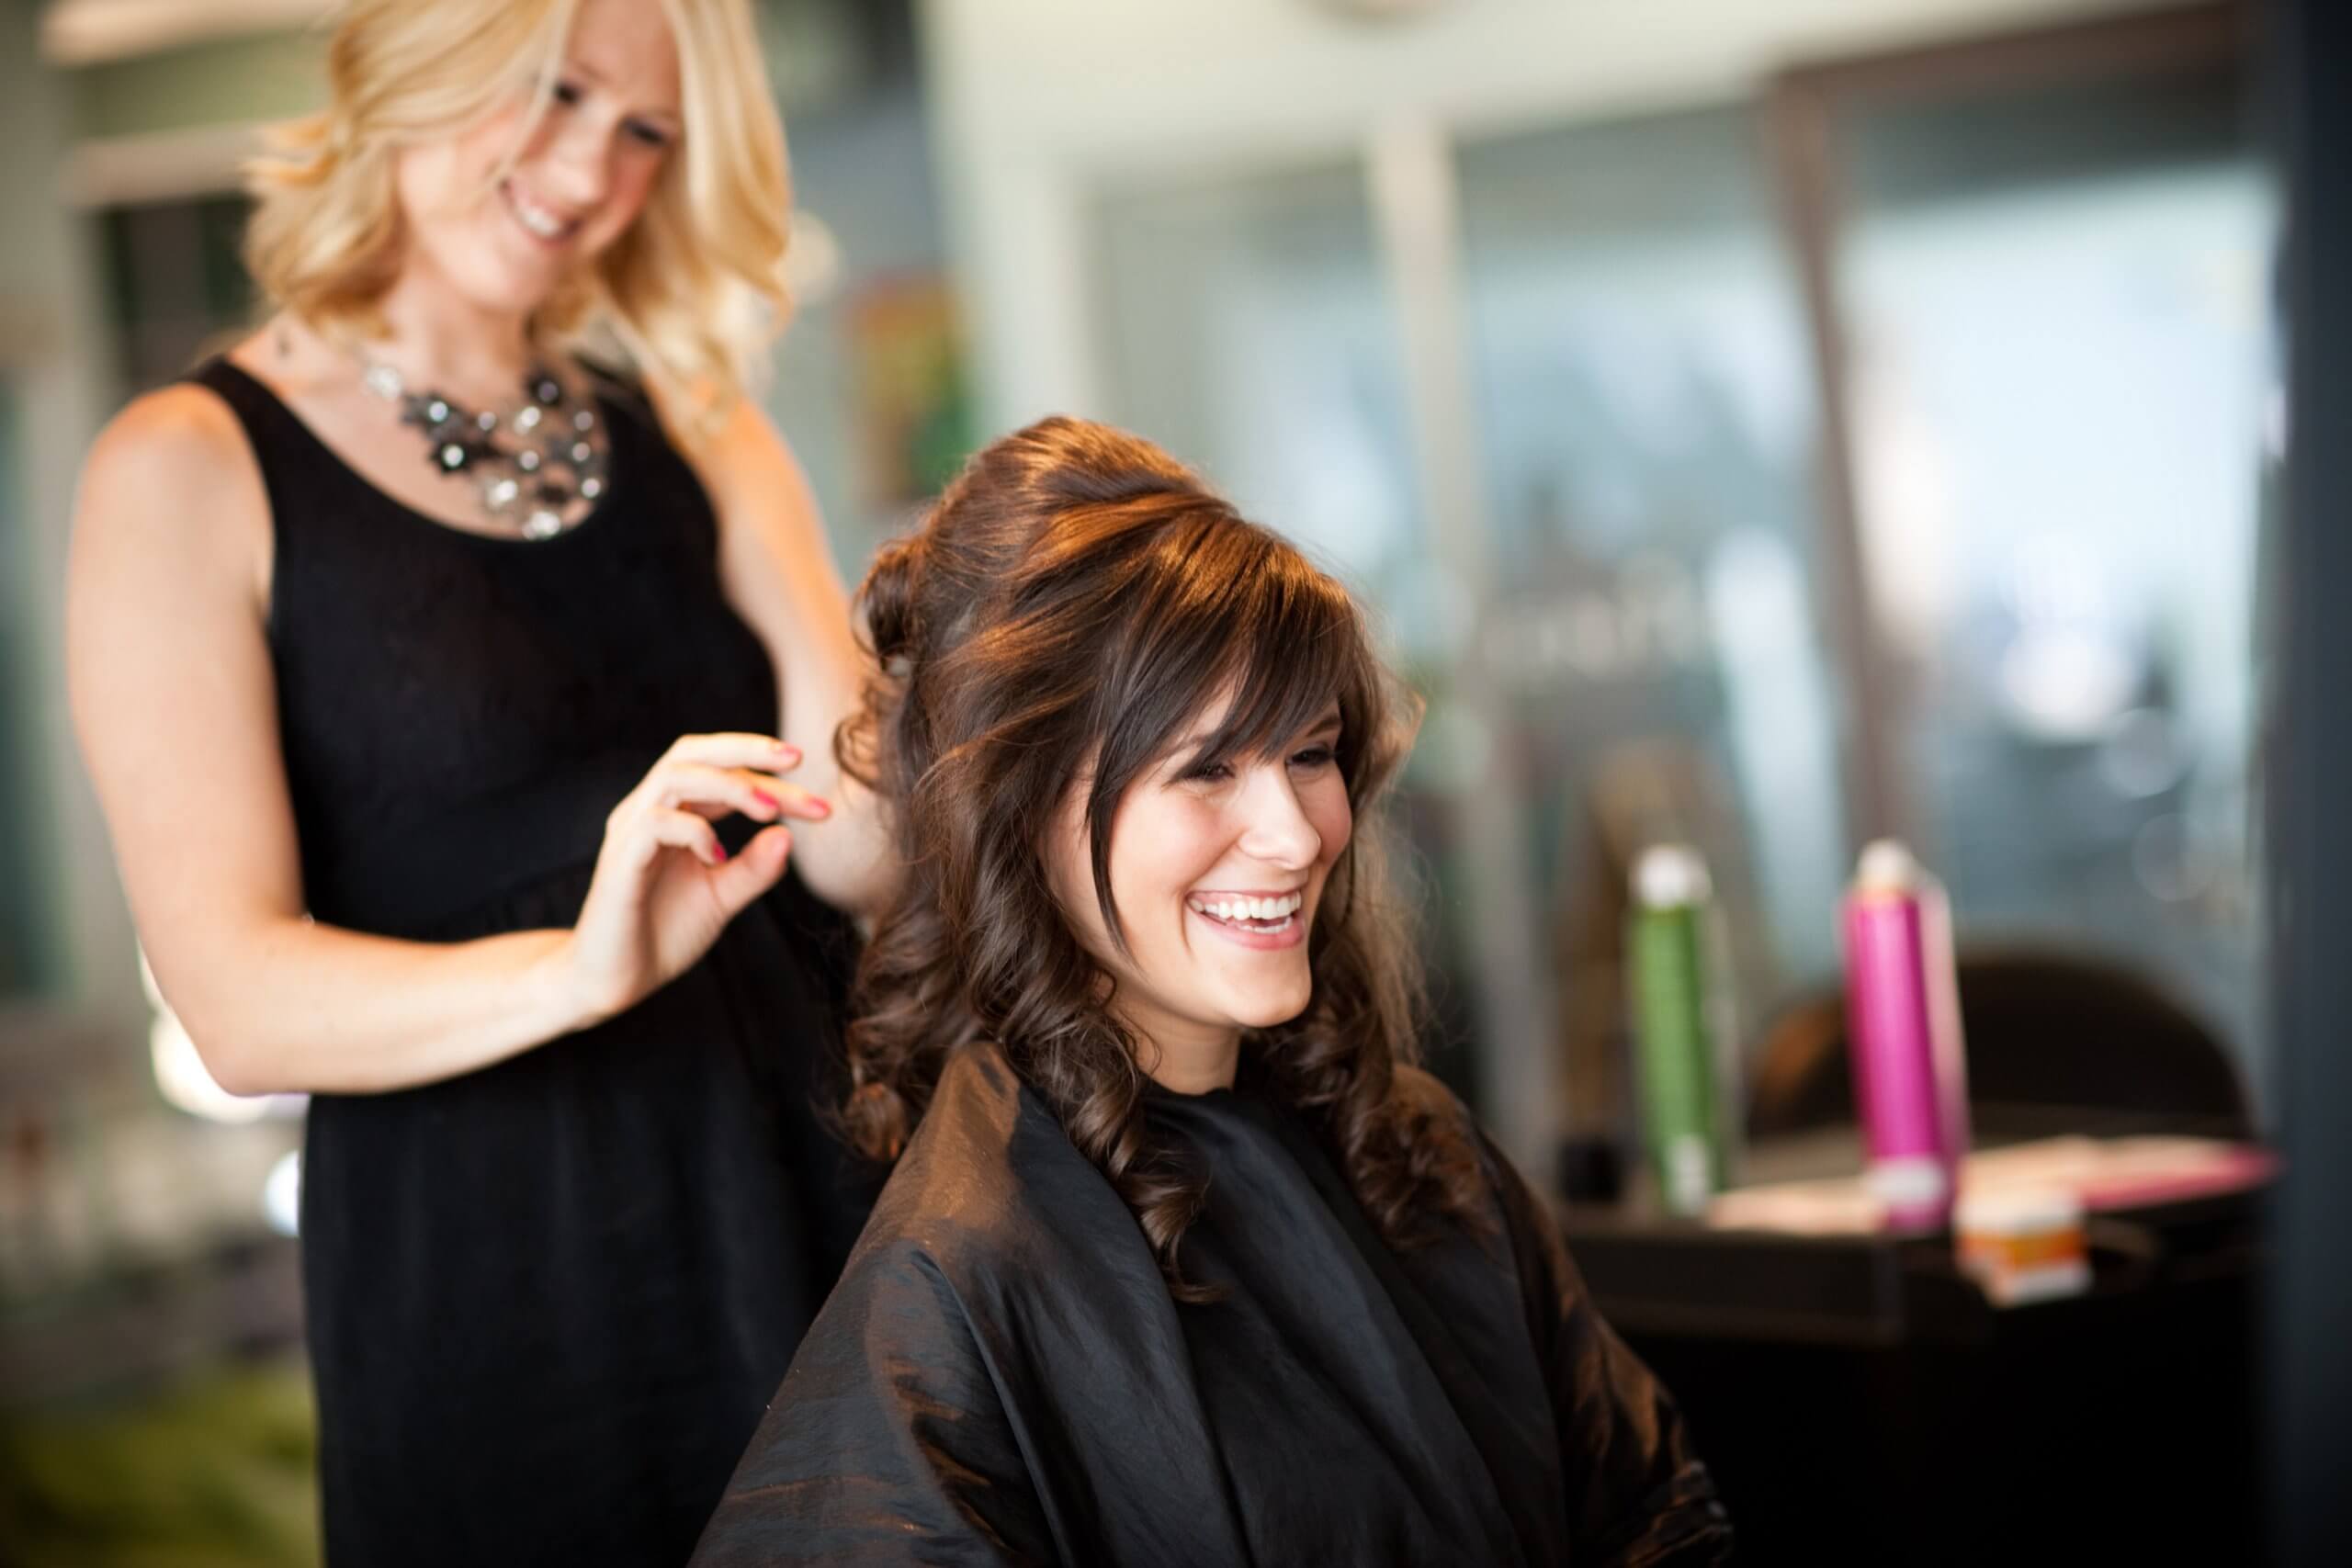 A hairstylist smiles as she styles a happy client's hair in a modern salon, capturing the thriving atmosphere where excellent service leads to increased revenue.